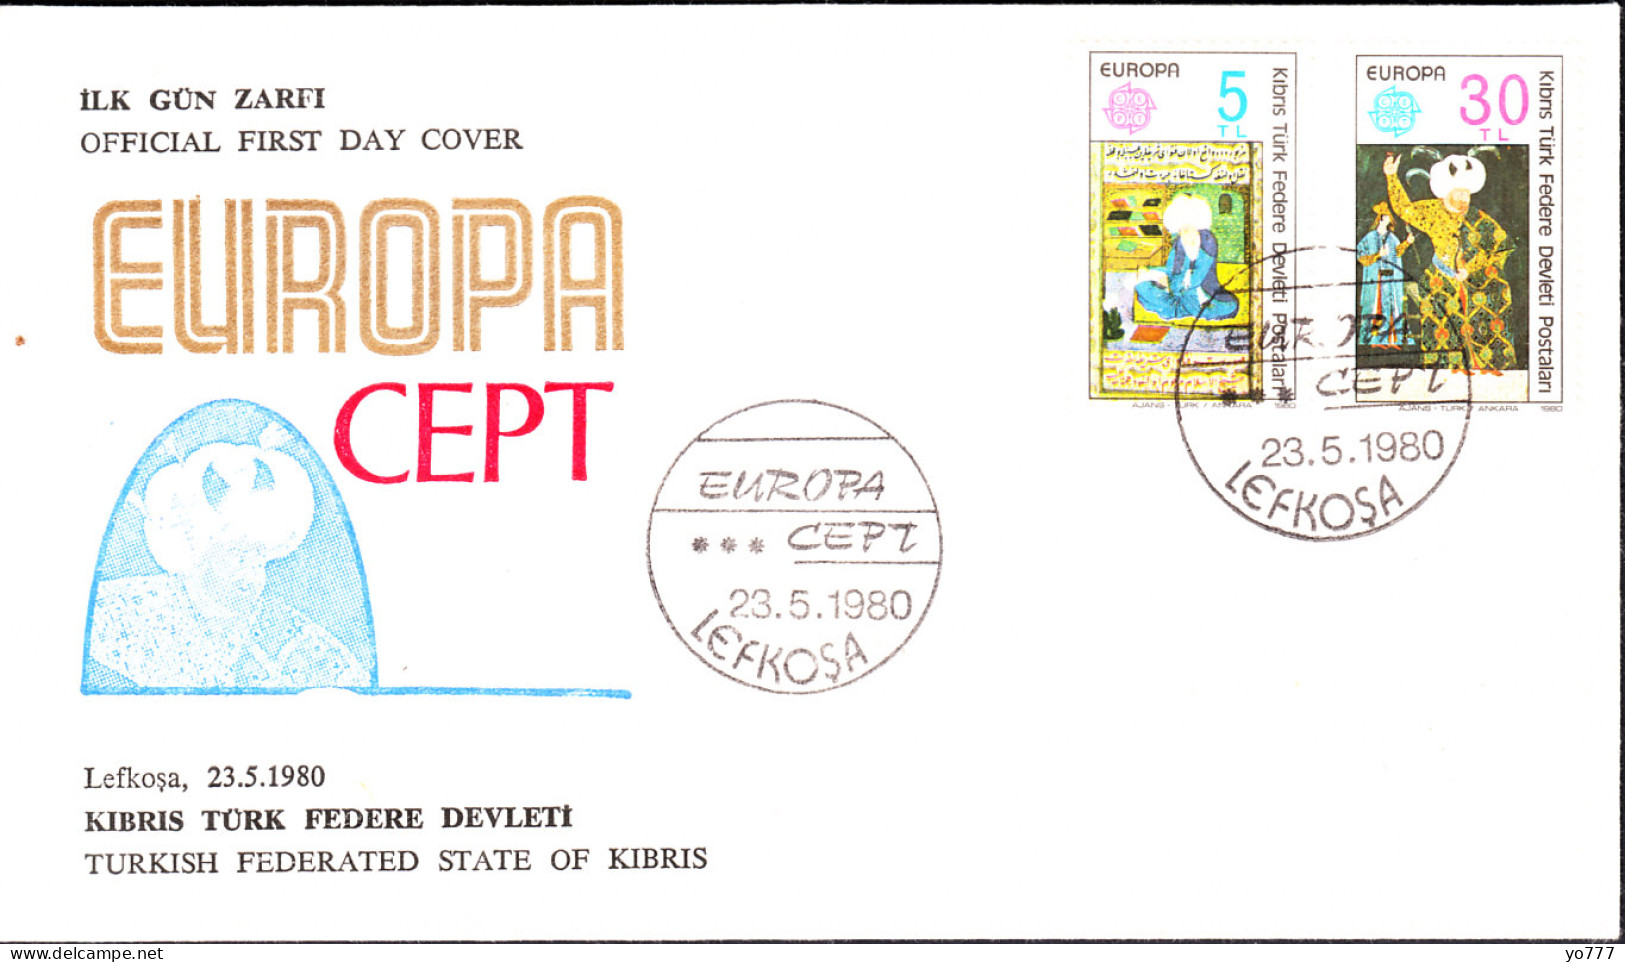 KK-027 NORTHERN CYPRUS EUROPA CEPT F.D.C. - Covers & Documents